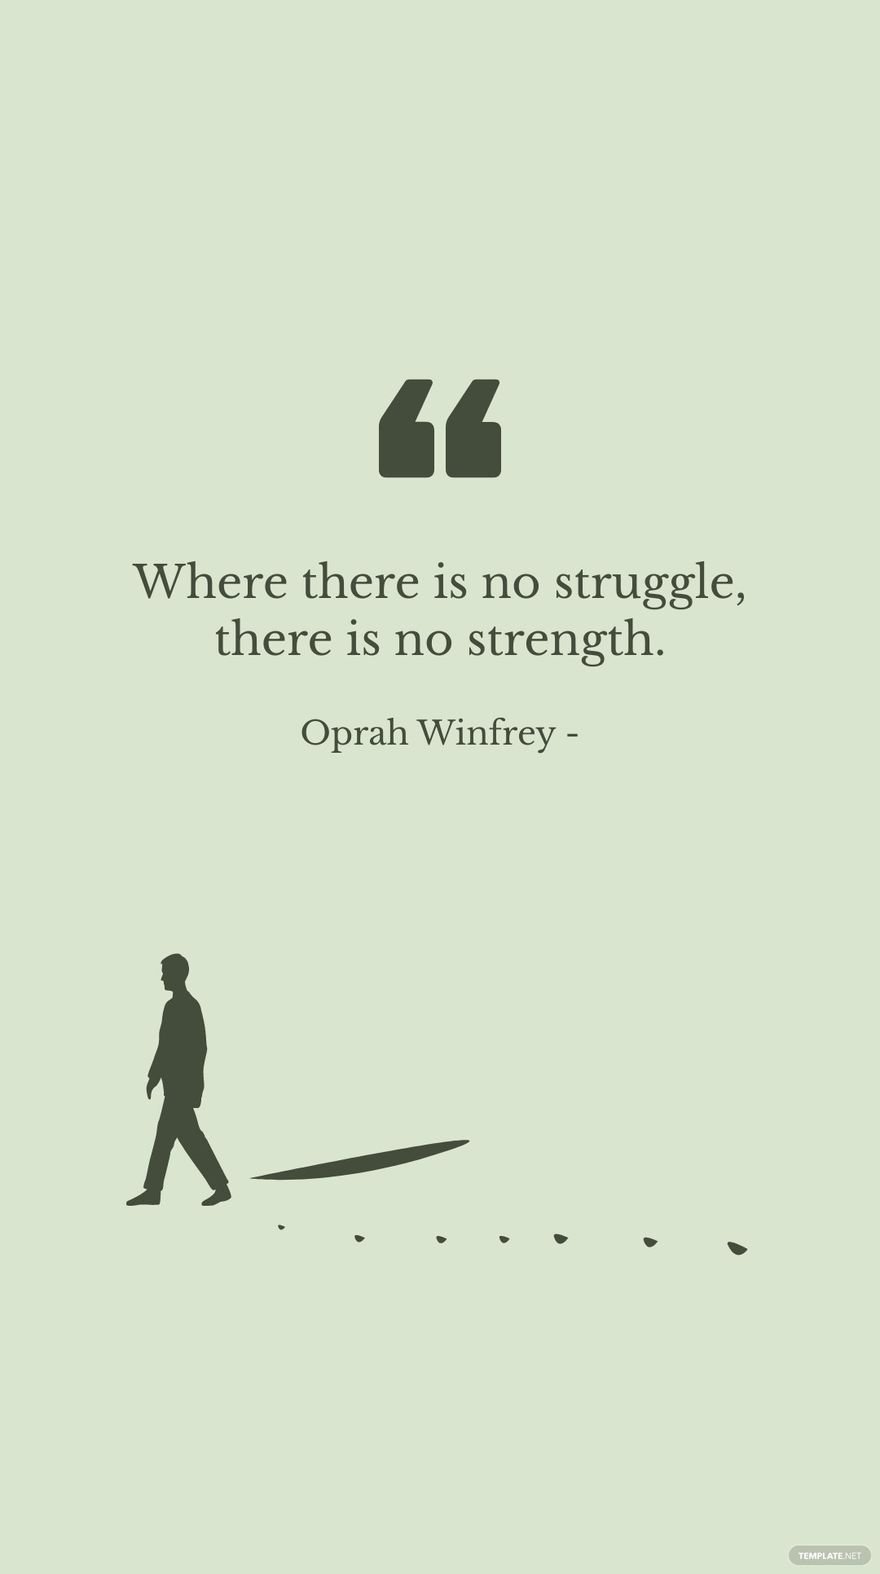 Oprah Winfrey - Where there is no struggle, there is no strength.